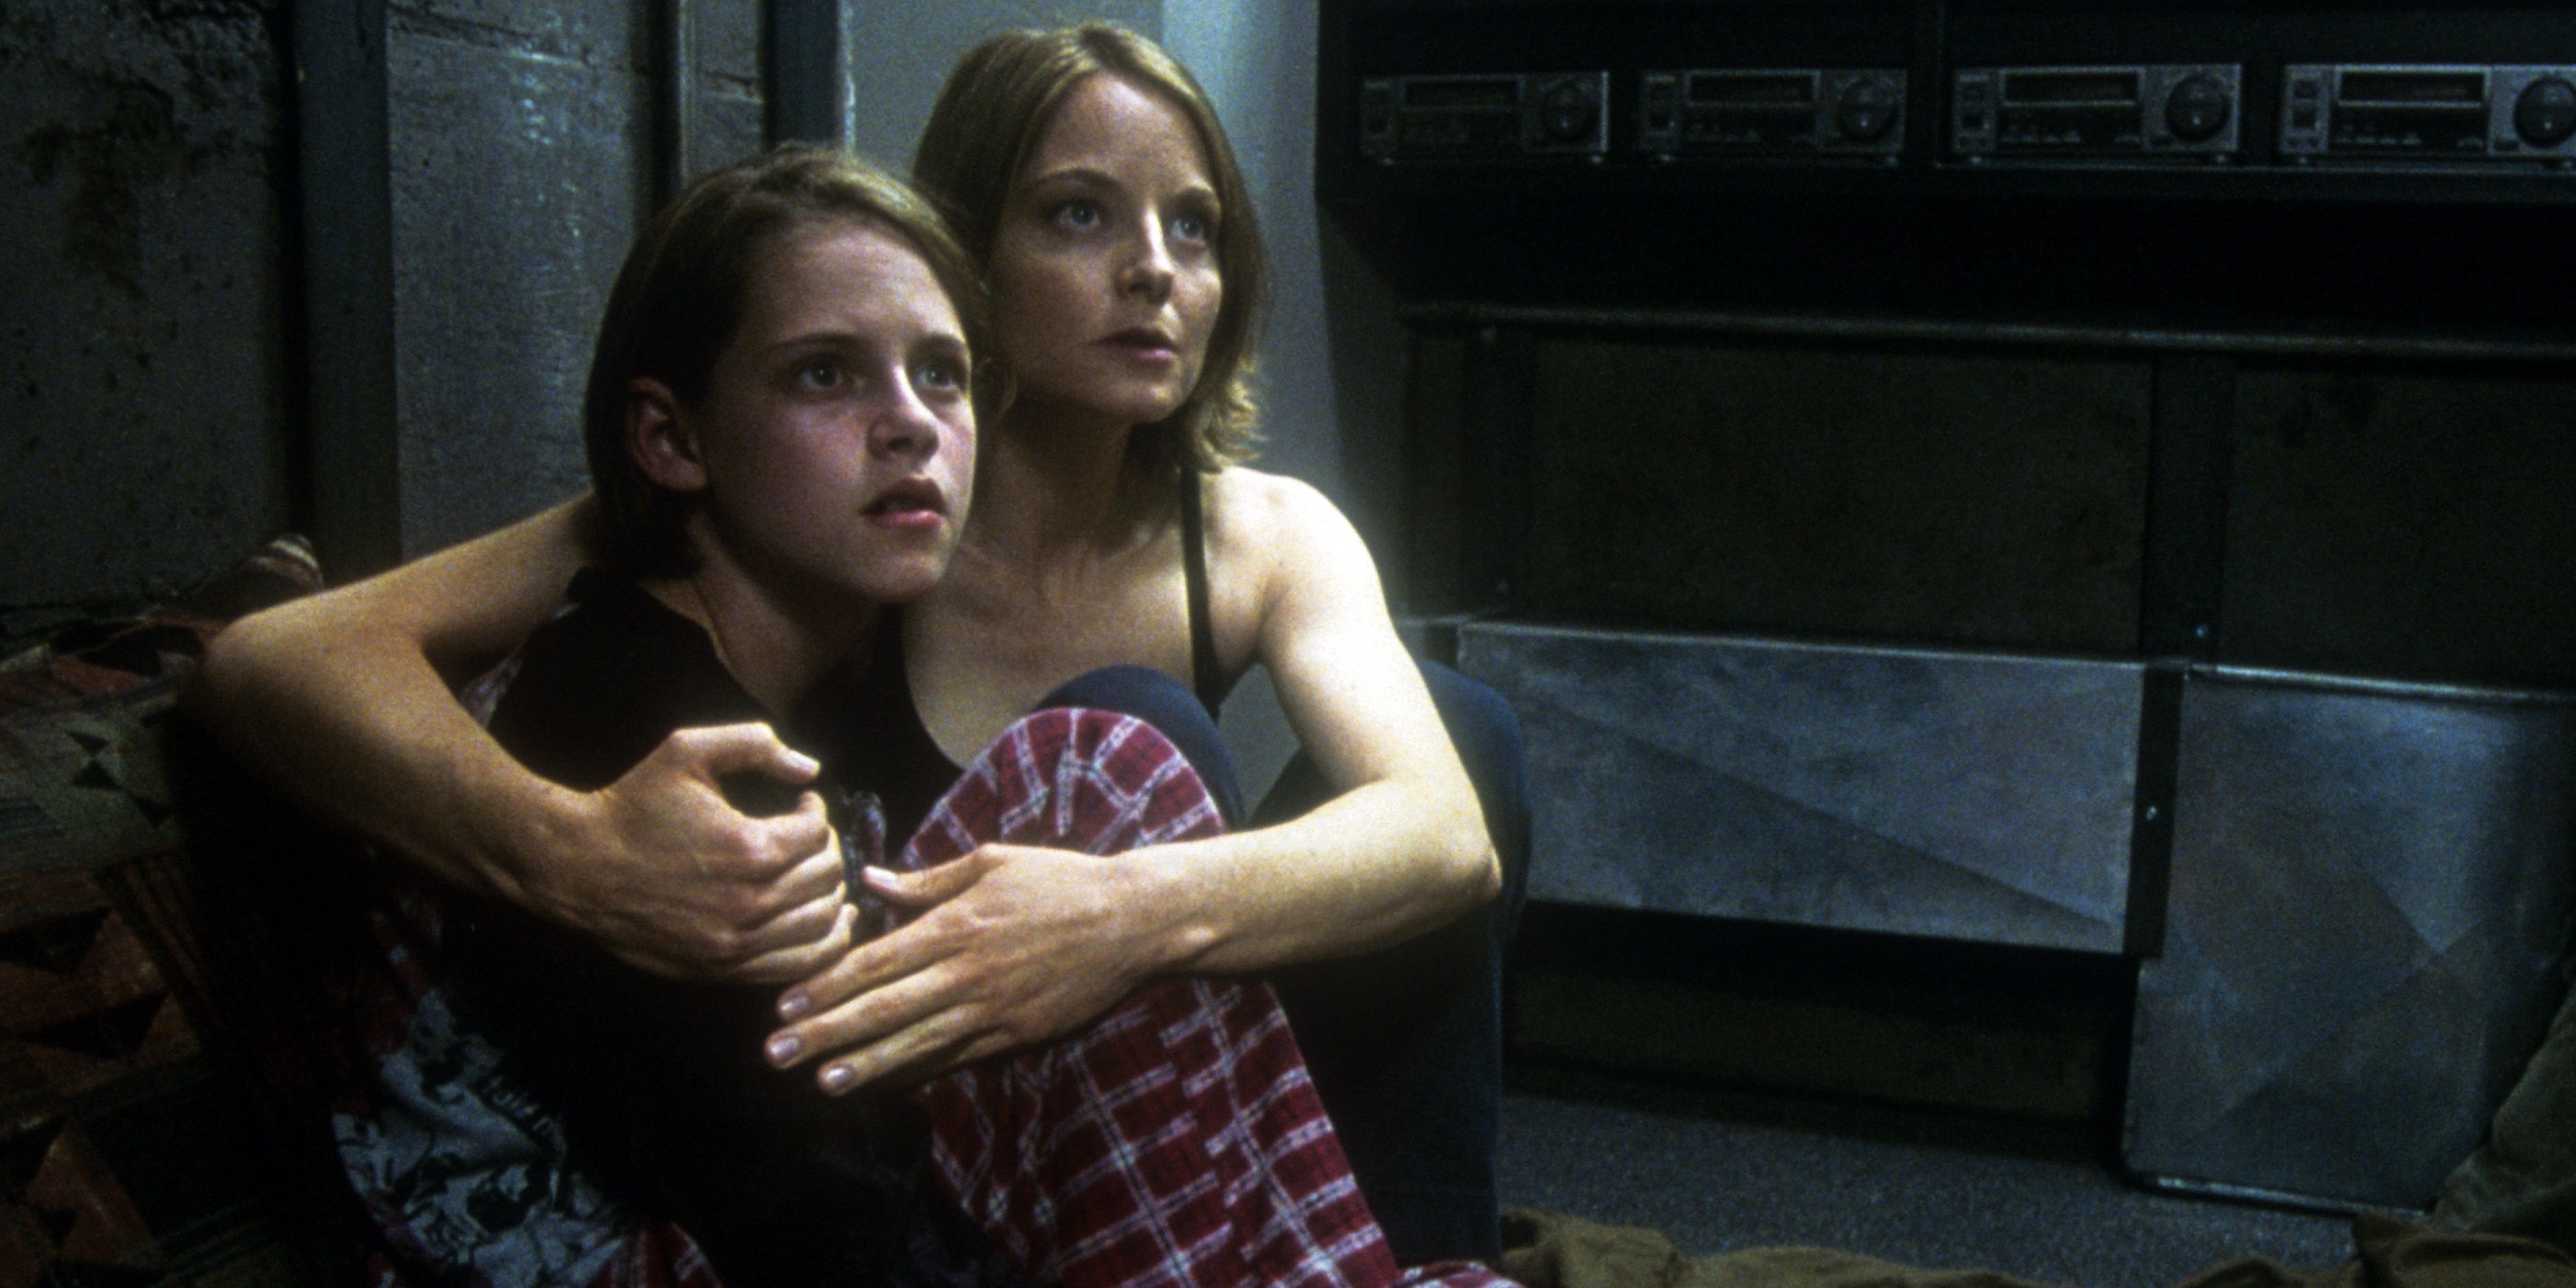 Meg and Sarah in the panic room in Panic Room